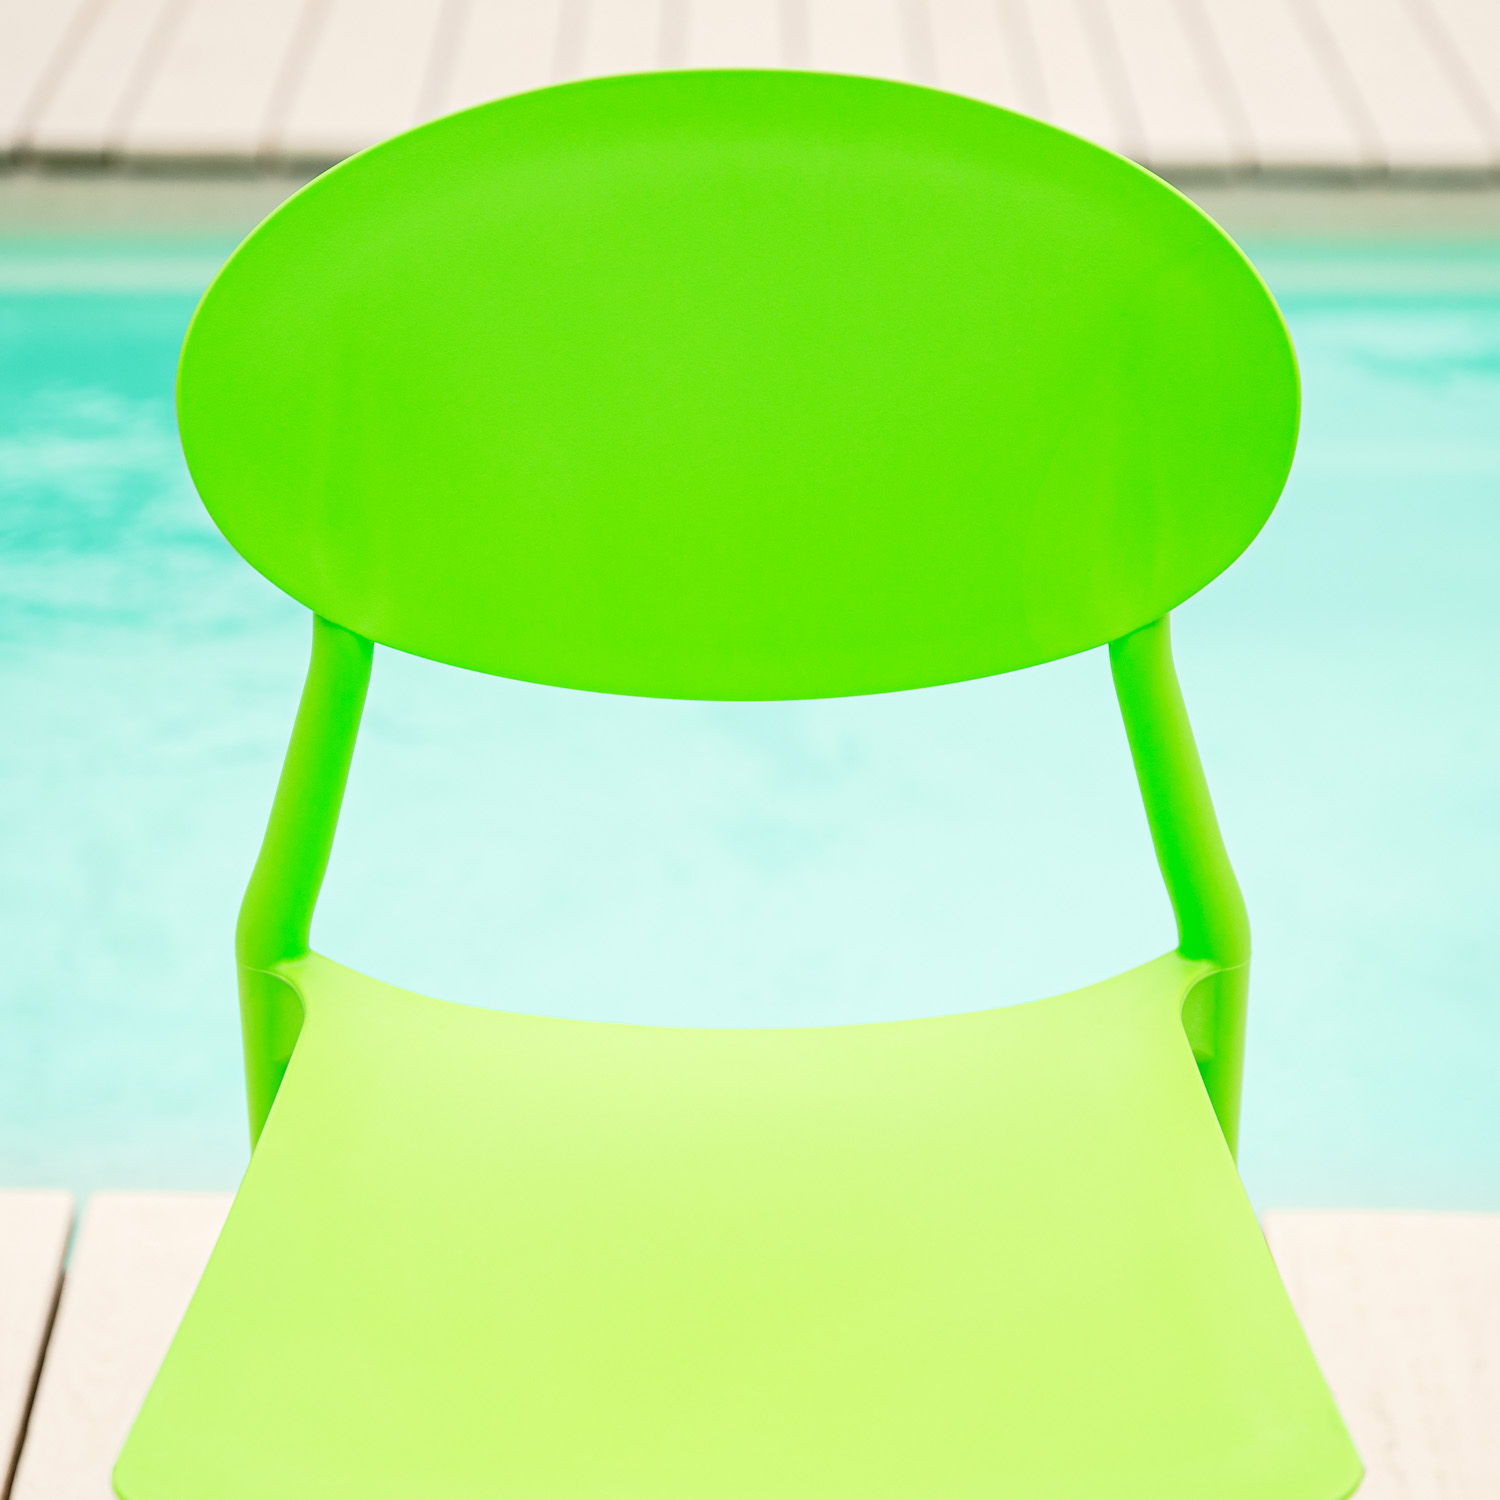 Garden chair Set of 4 Camping chairs Green Outdoor chairs Plastic Stacking chairs Kitchen chairs